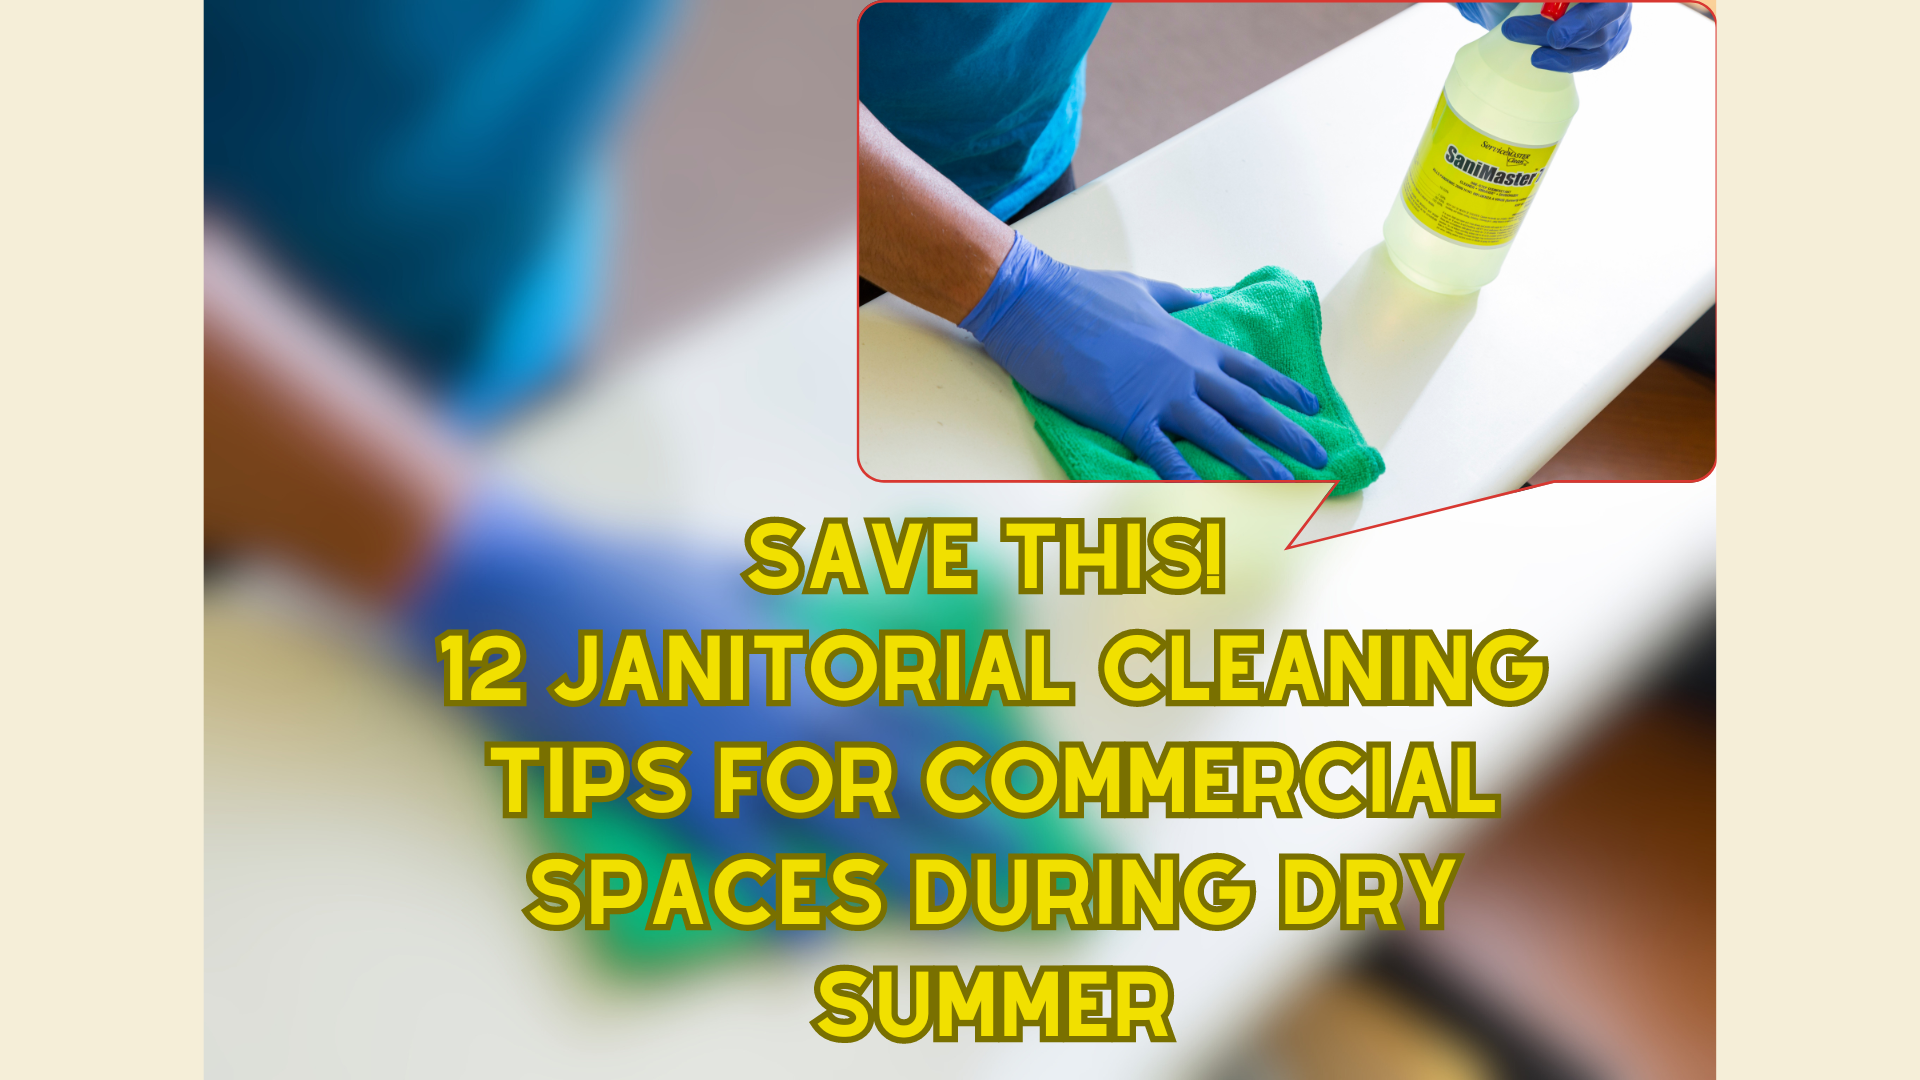 Save This! 12 Janitorial Cleaning Tips for Commercial Spaces During Dry Summer